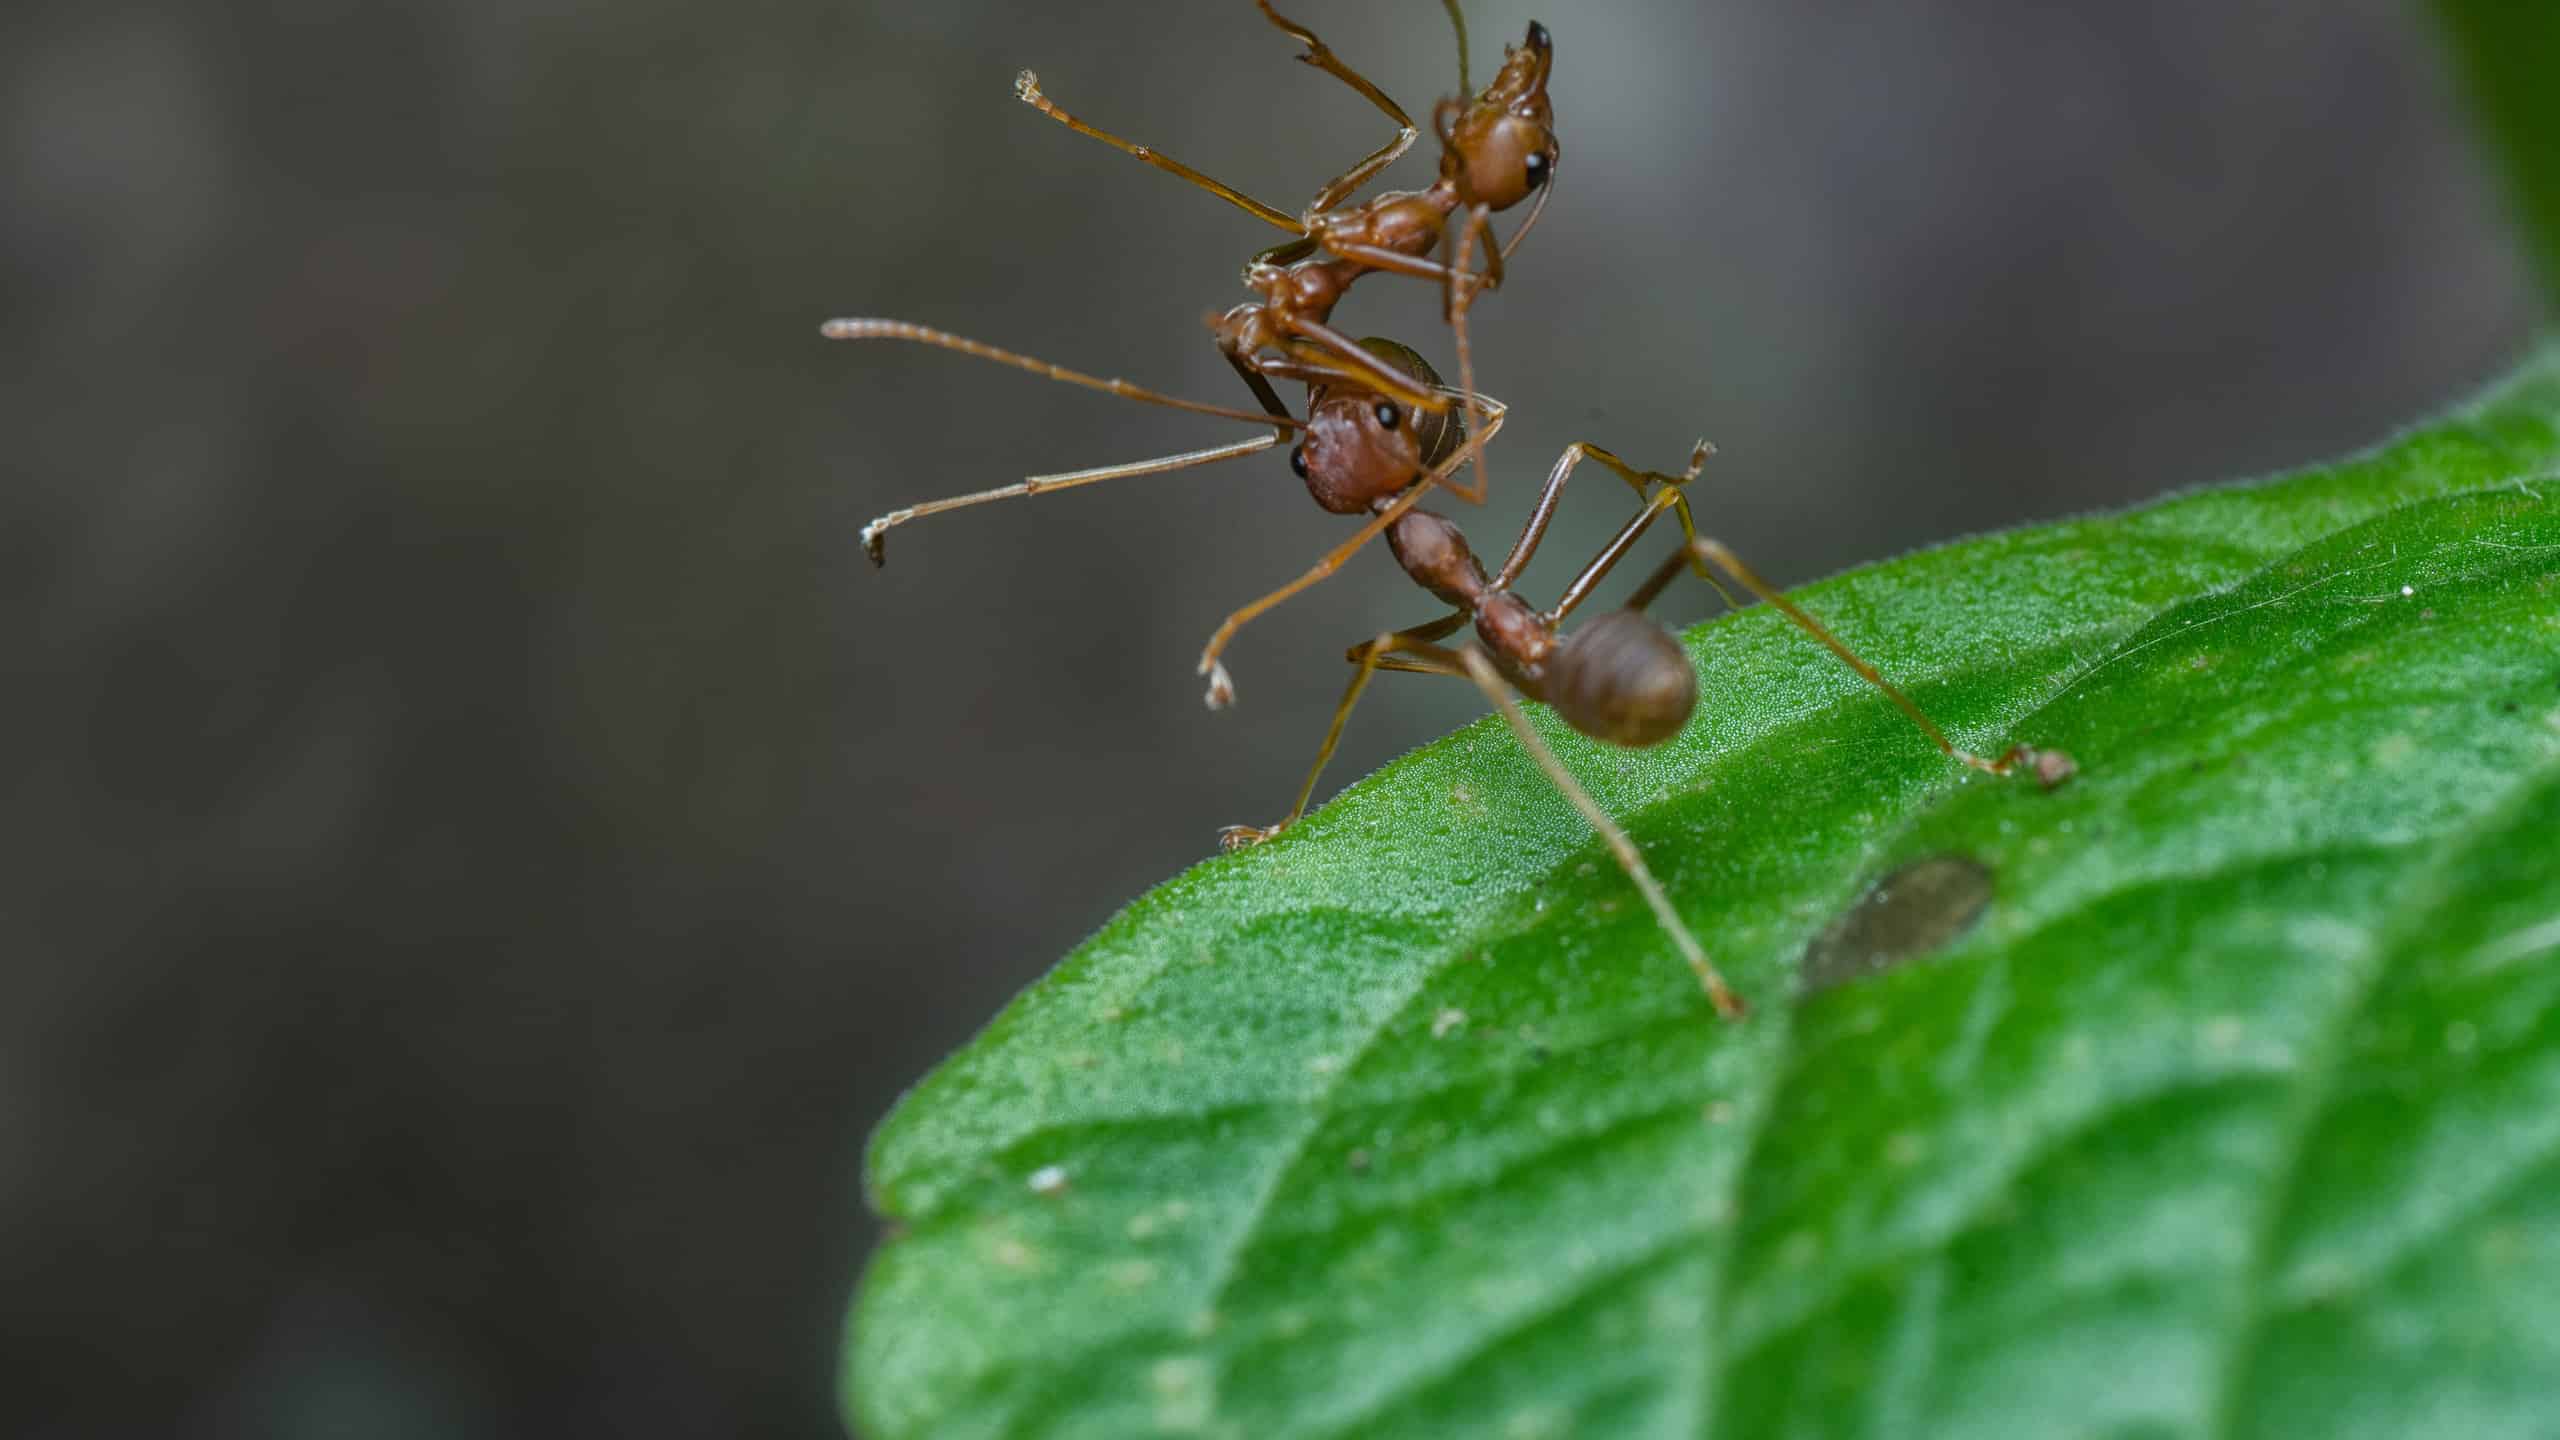 What Do Ants Do With Dead Insects